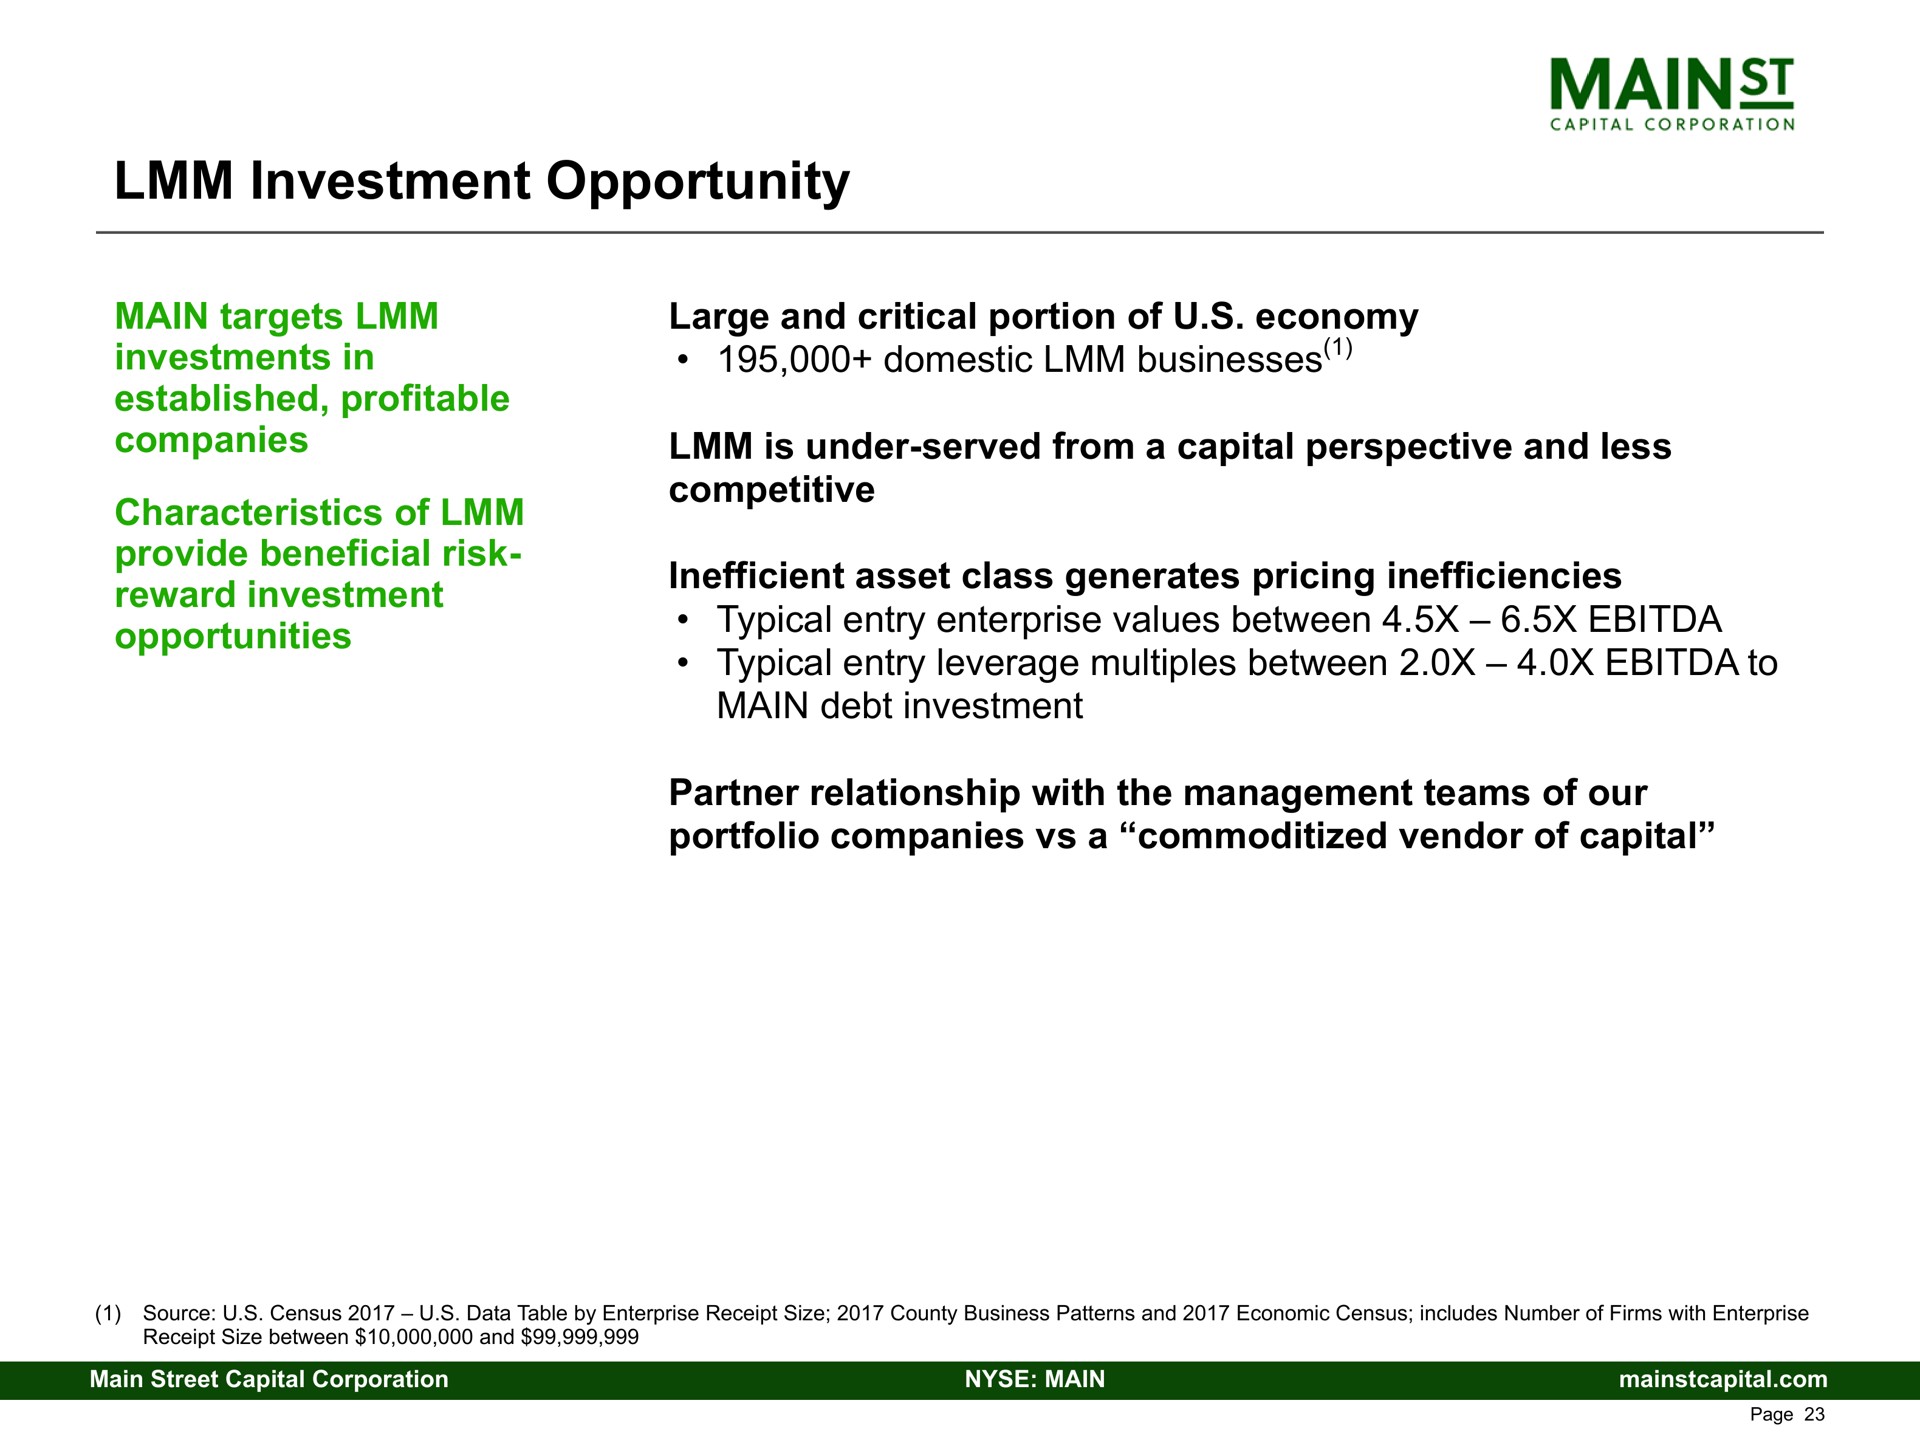 investment opportunity main targets investments in established profitable companies characteristics of provide beneficial risk reward investment opportunities large and critical portion of economy domestic businesses is under served from a capital perspective and less competitive inefficient asset class generates pricing inefficiencies typical entry enterprise values between typical entry leverage multiples between to main debt investment partner relationship with the management teams of our portfolio companies a vendor of capital | Main Street Capital